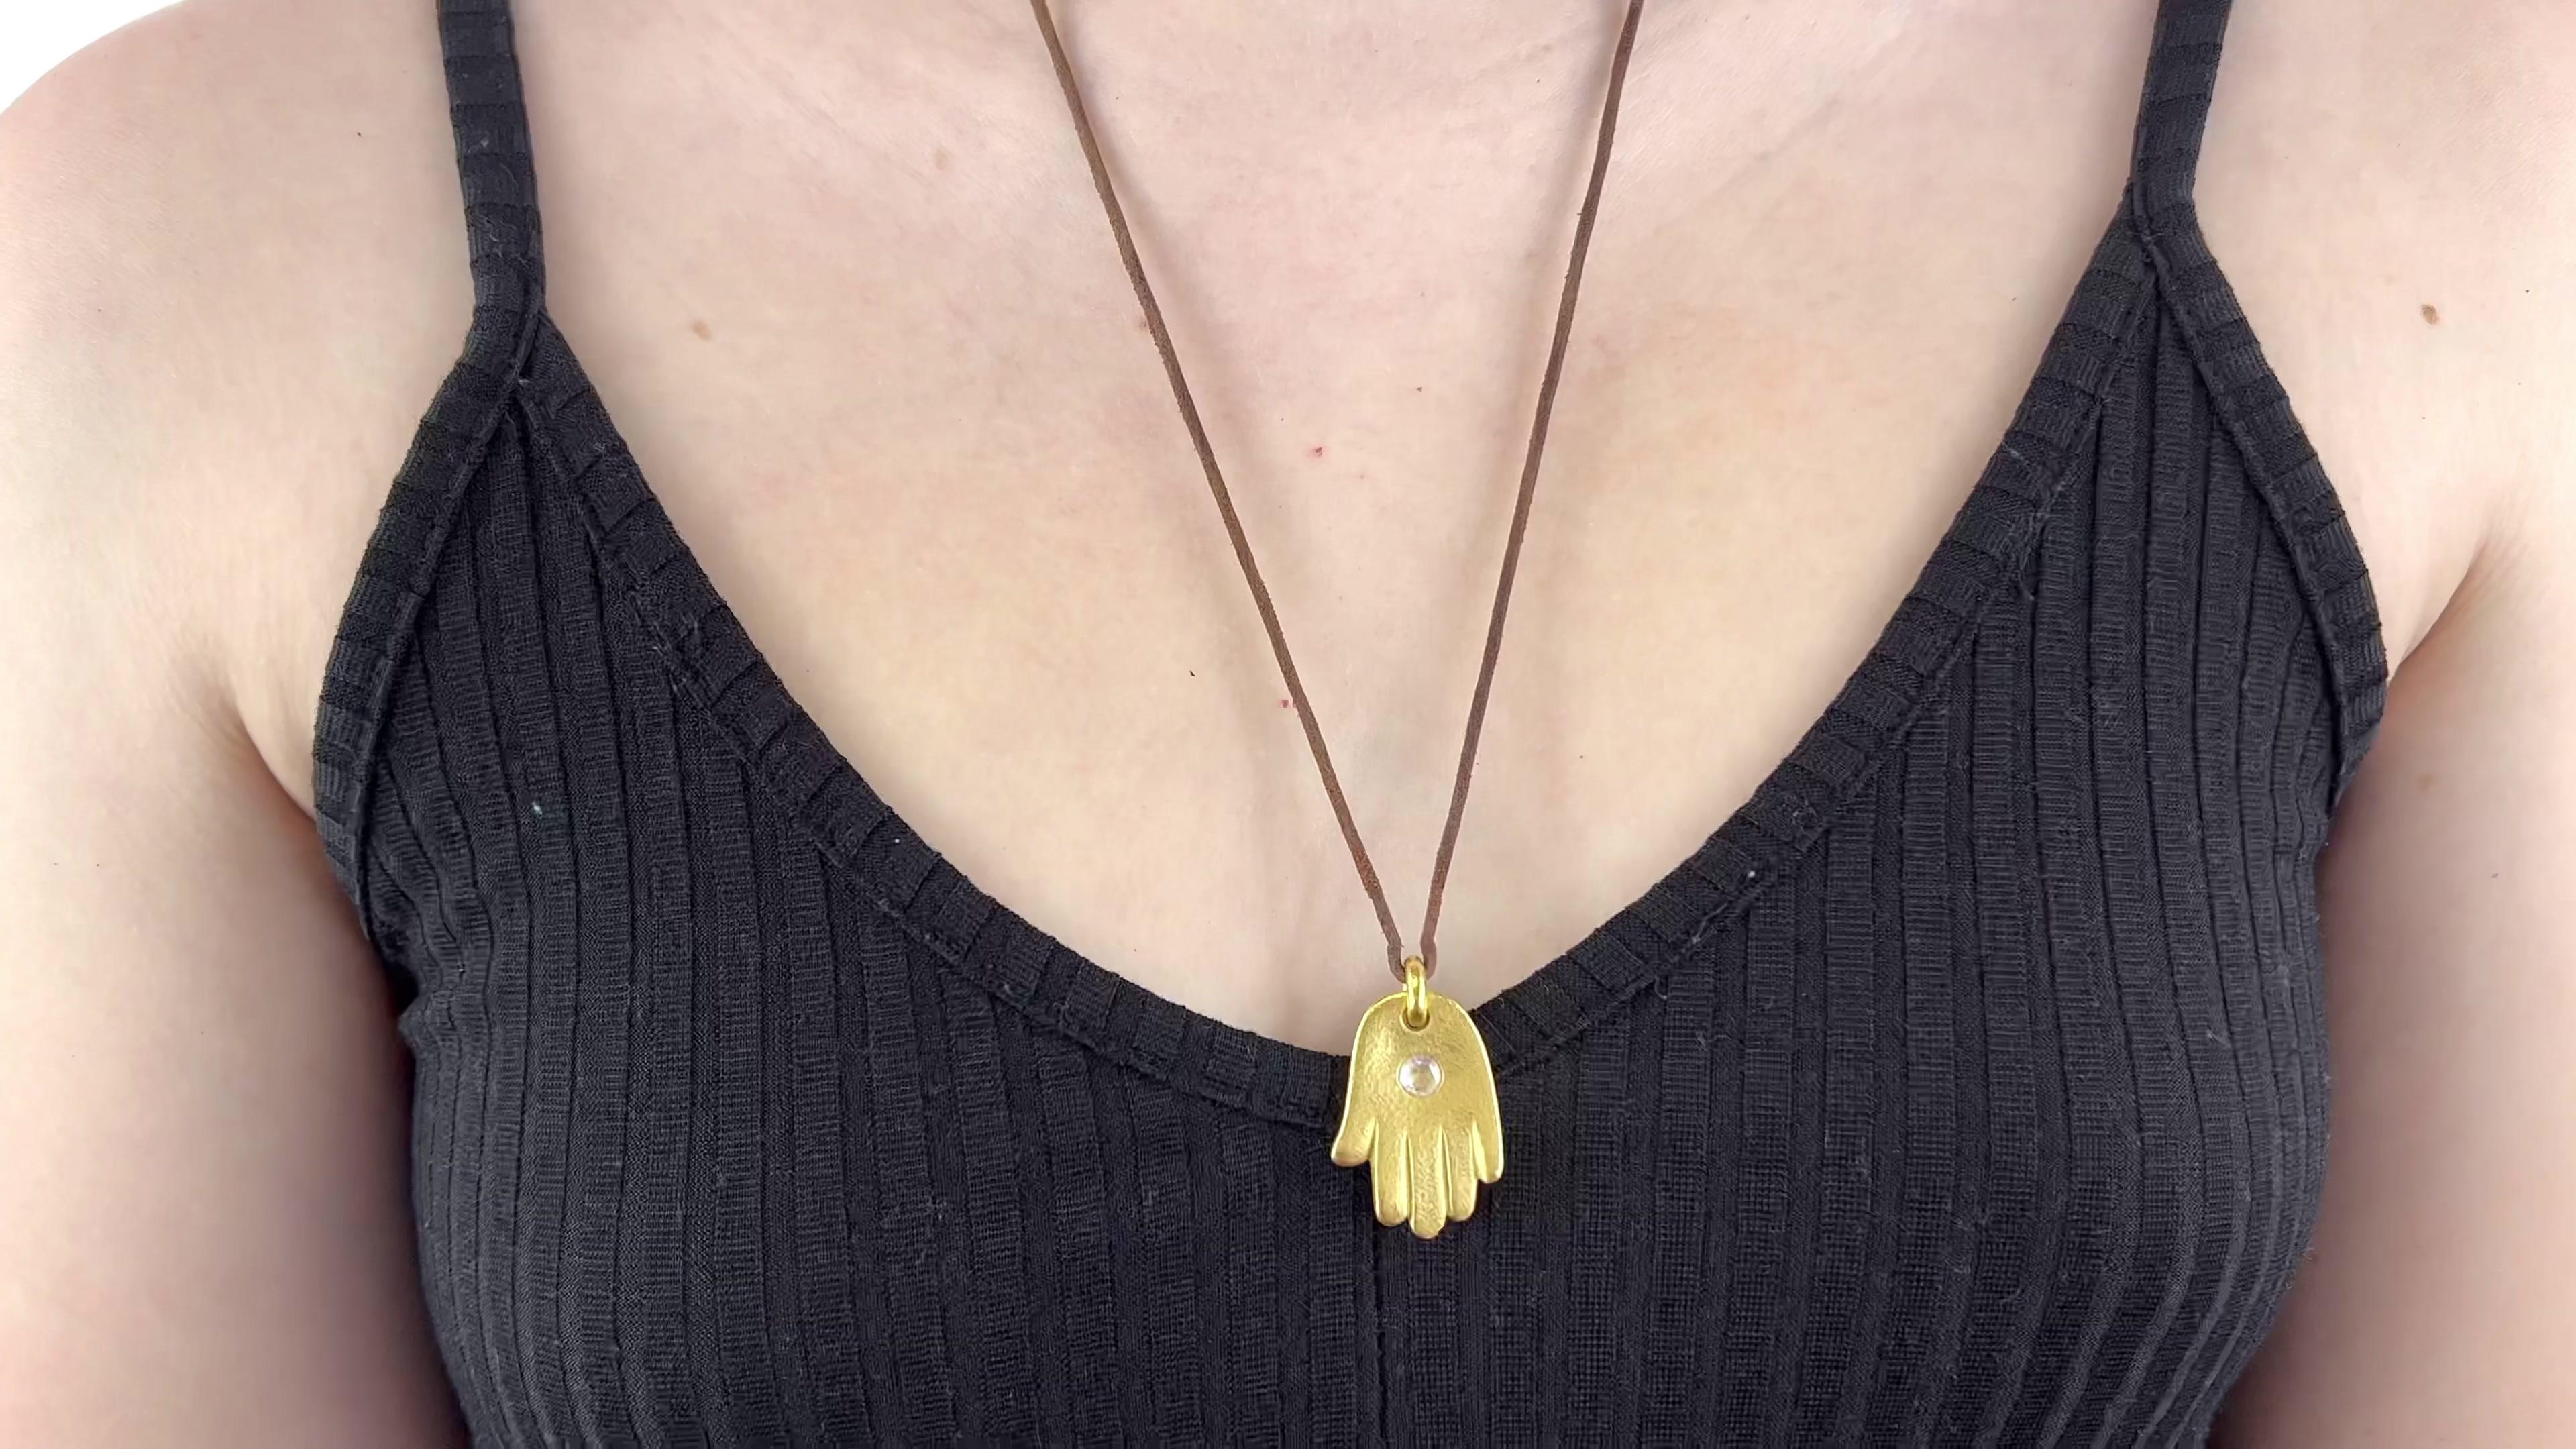 One Vintage Linda Lee Johnson Diamond 21 Karat Gold Leather Cord Hand Necklace. Featuring one rose cut diamond weighing approximately 0.20 carat, graded E VVS. Crafted in 21 karat yellow gold, with Linda Lee Johnson maker's mark. Circa 1990s. The